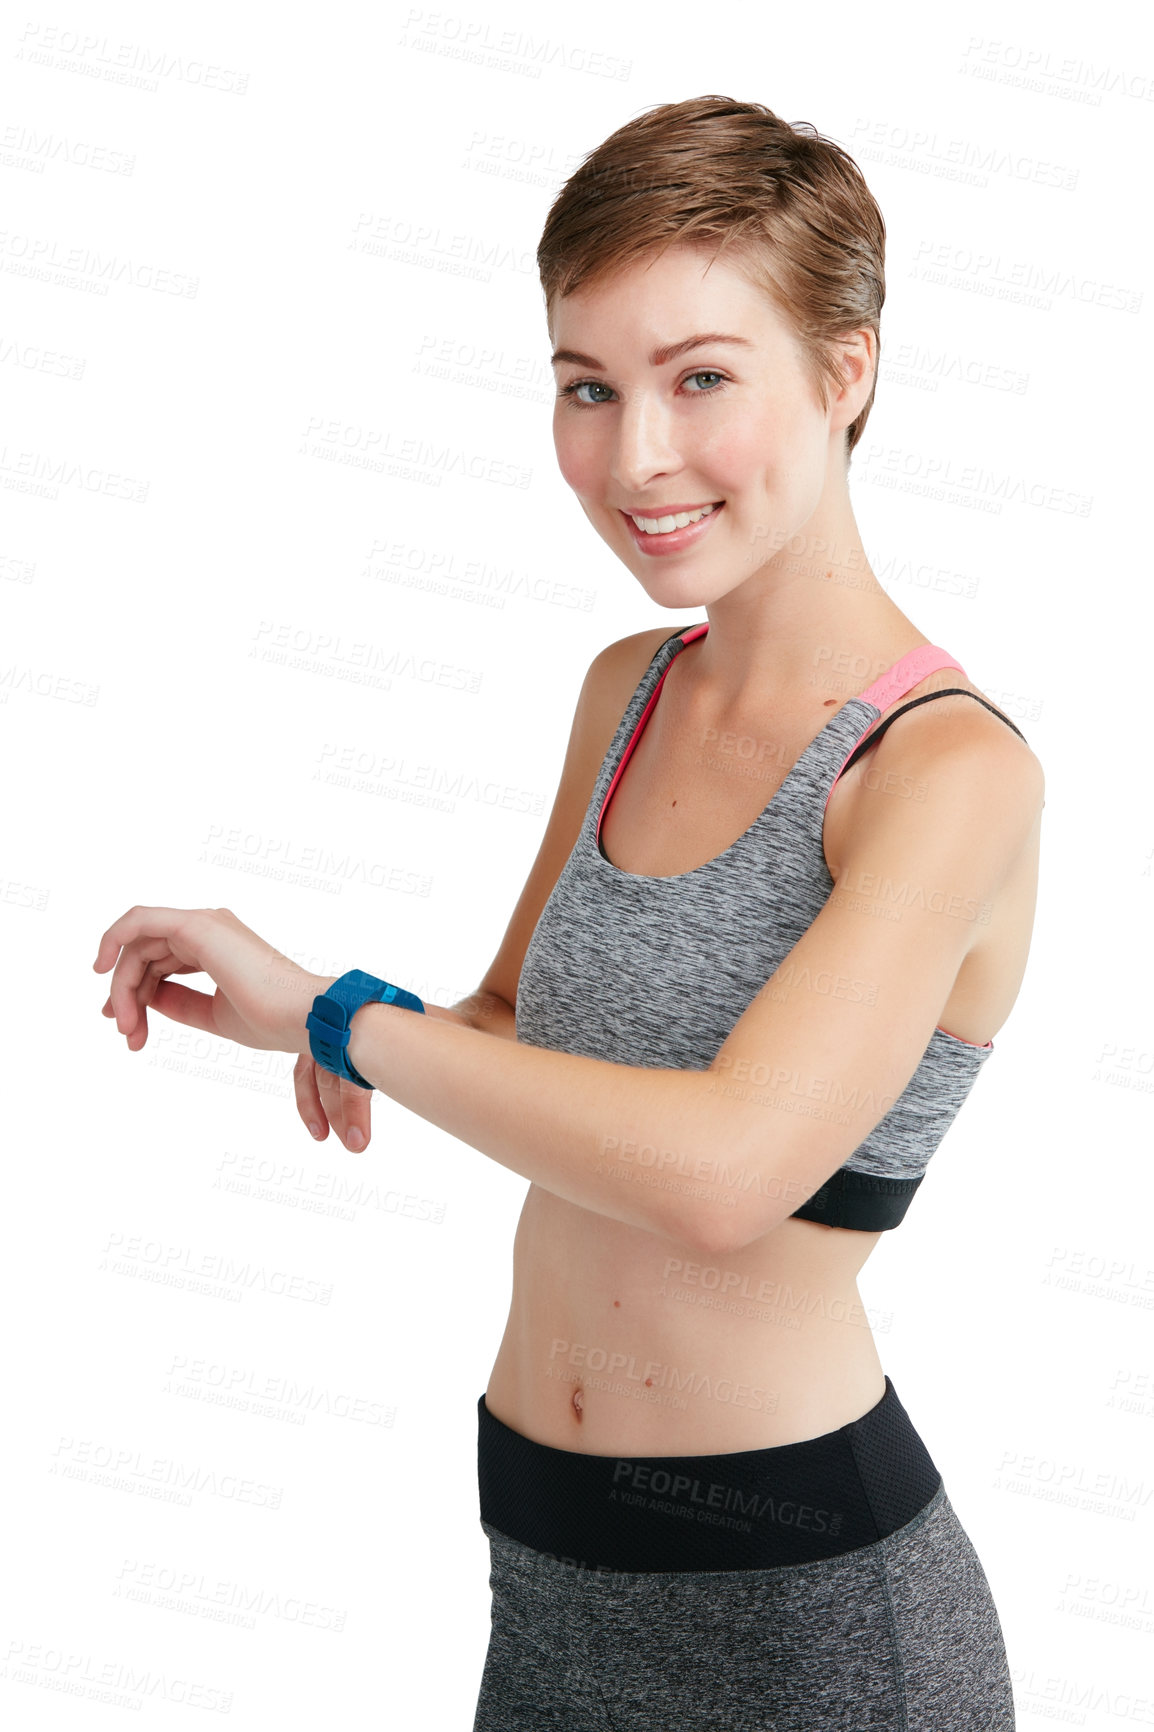 Buy stock photo Studio portrait of a fit young woman checking her watch against a white background